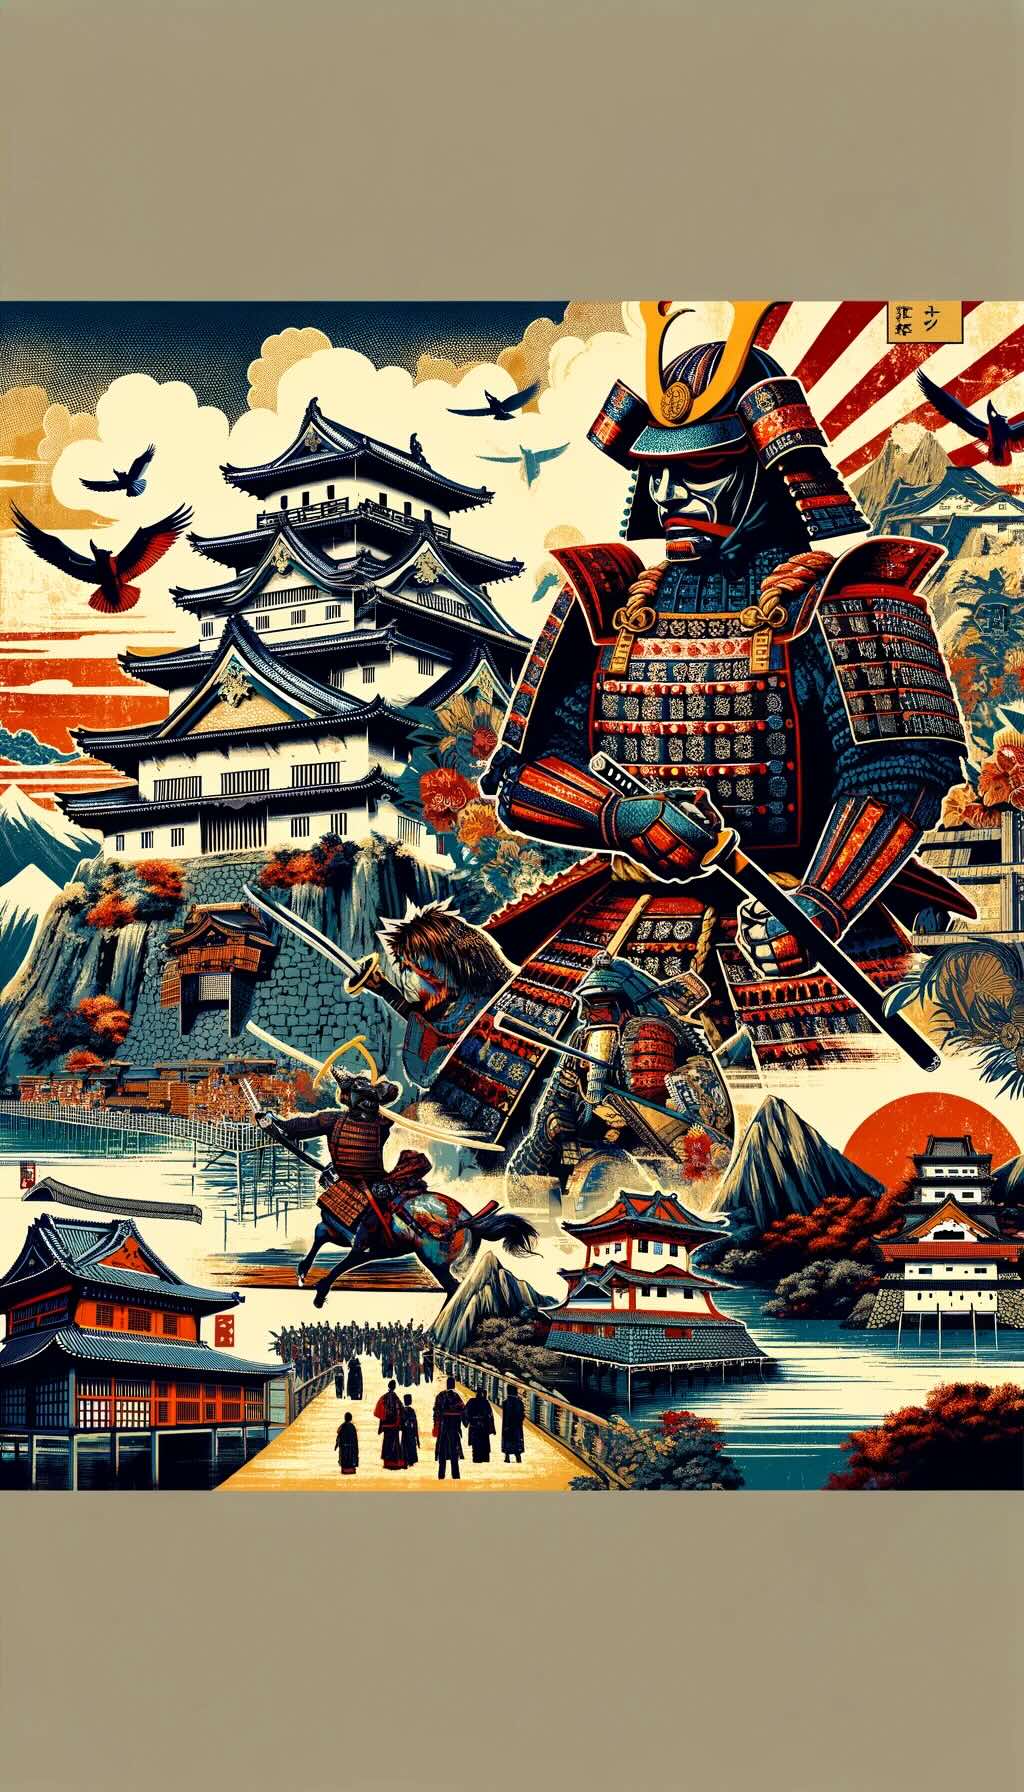 Samurai history and heritage in Japan vividly depicts key sites and symbols associated with the Samurai, including ancient castles, battlefields, traditional armor, and iconic locations, symbolizing the power, honor, and spirit of the Samurai era